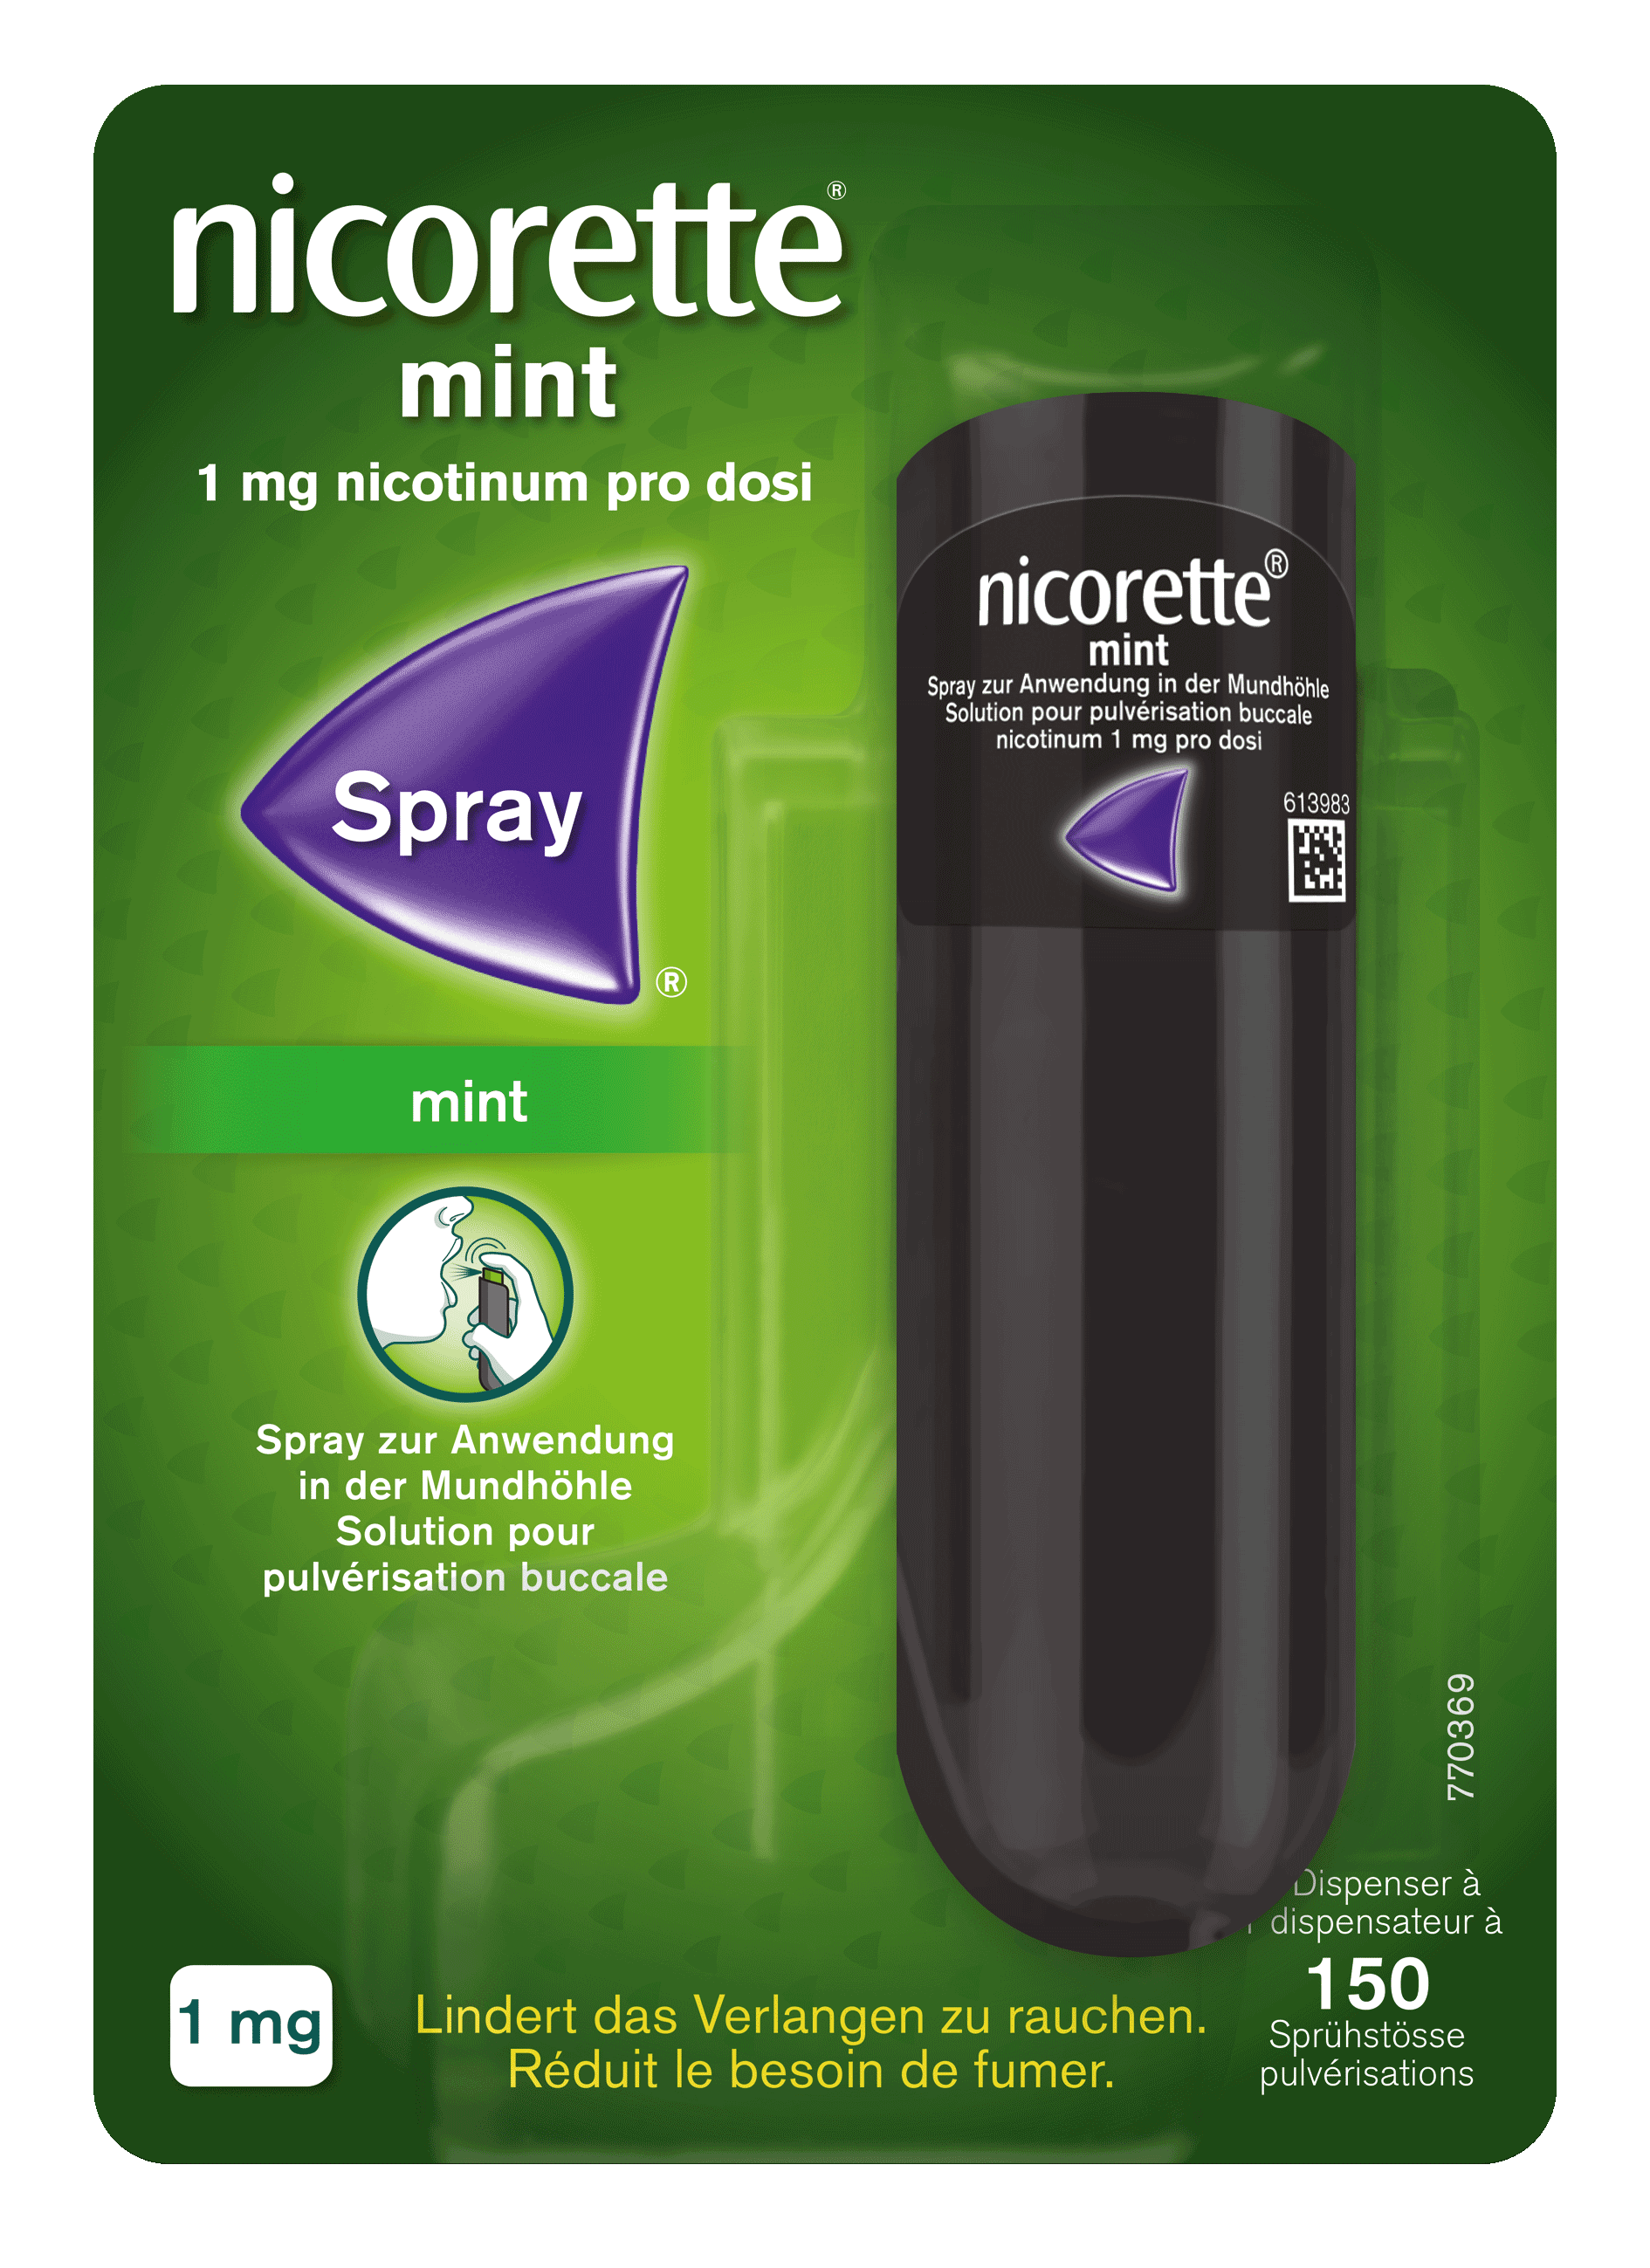 https://www.nicorette.ch/sites/nicorette_ch/files/product-images/nic-spray-mint-1mg-1x150-blister-ch-2018.png